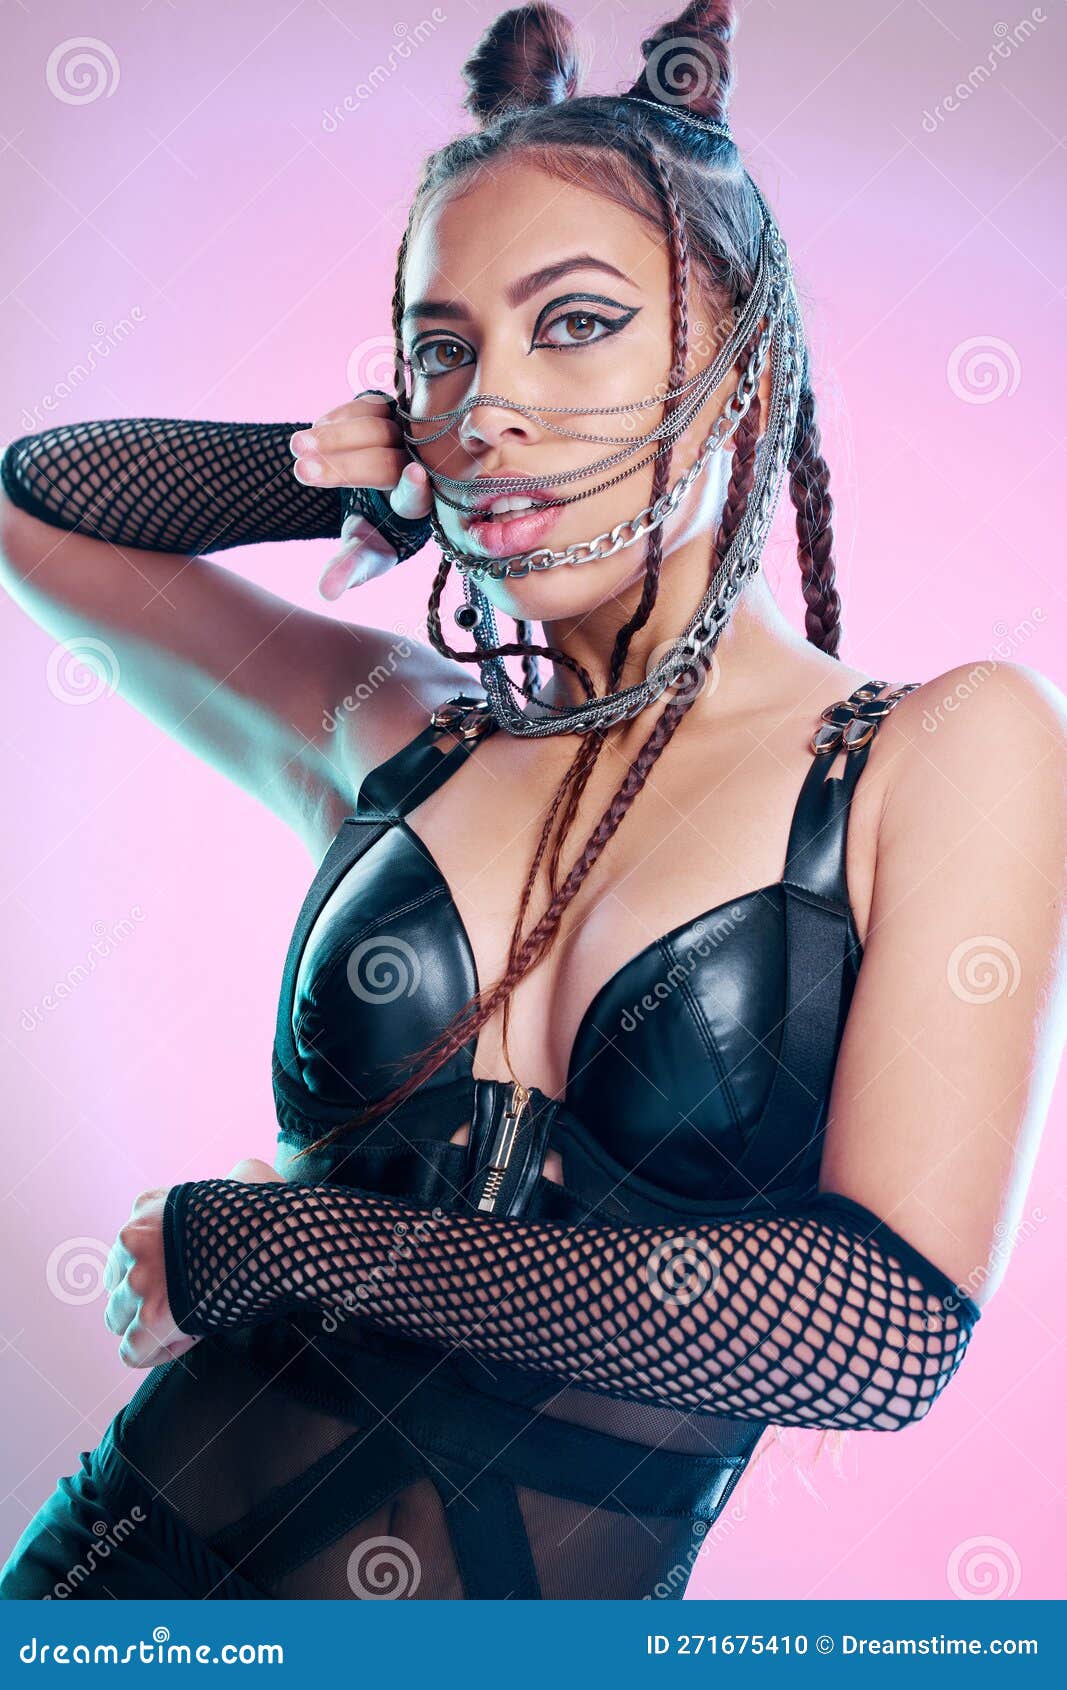 cindy pratte add sexy woman in chains photo